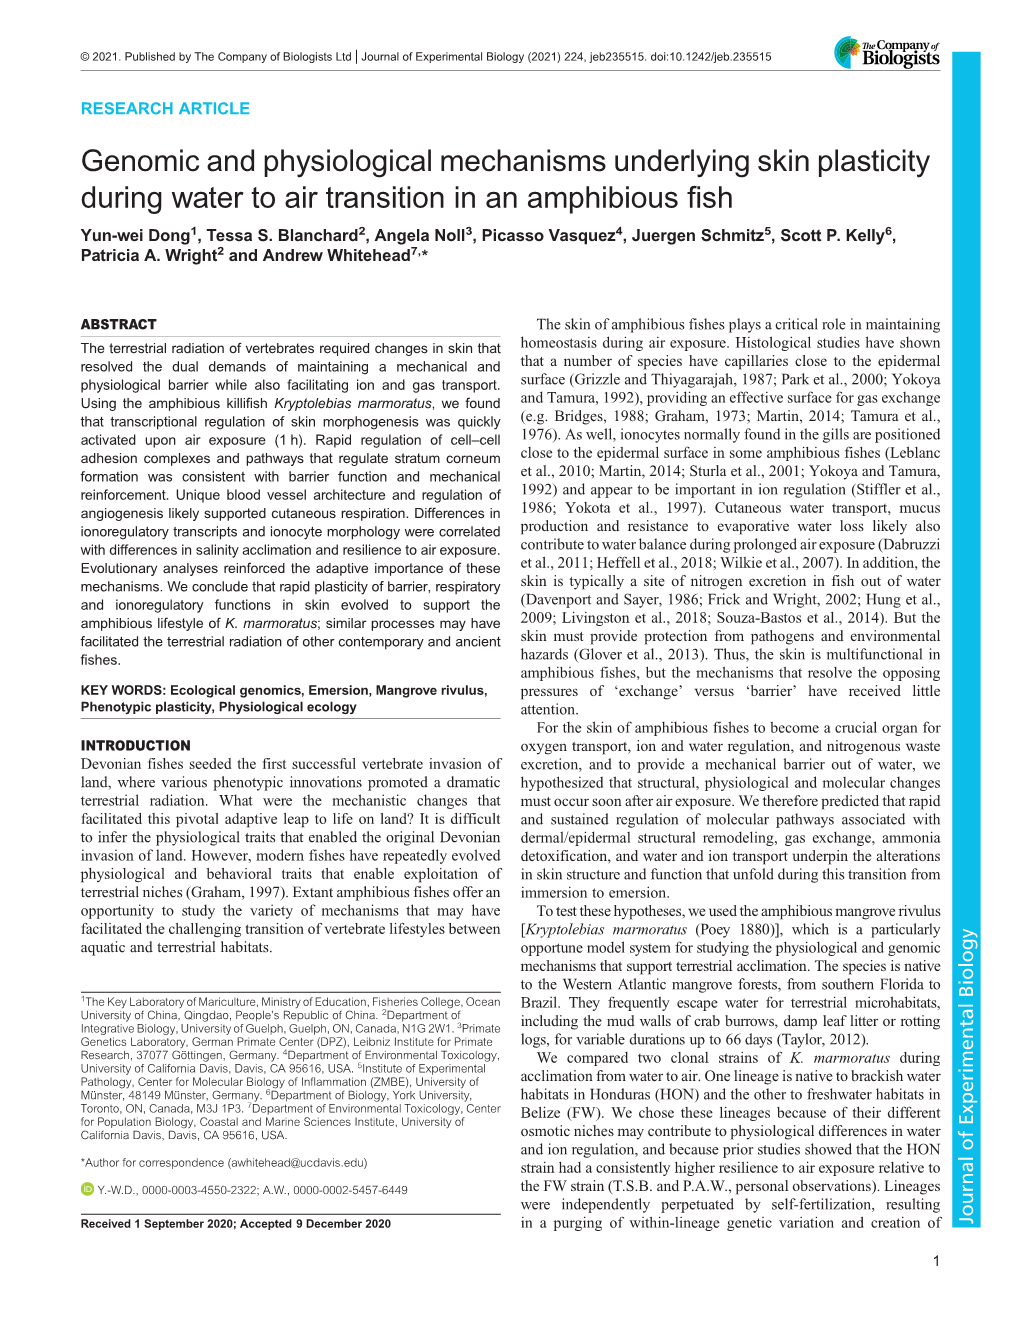 Genomic and Physiological Mechanisms Underlying Skin Plasticity During Water to Air Transition in an Amphibious Fish Yun-Wei Dong1, Tessa S